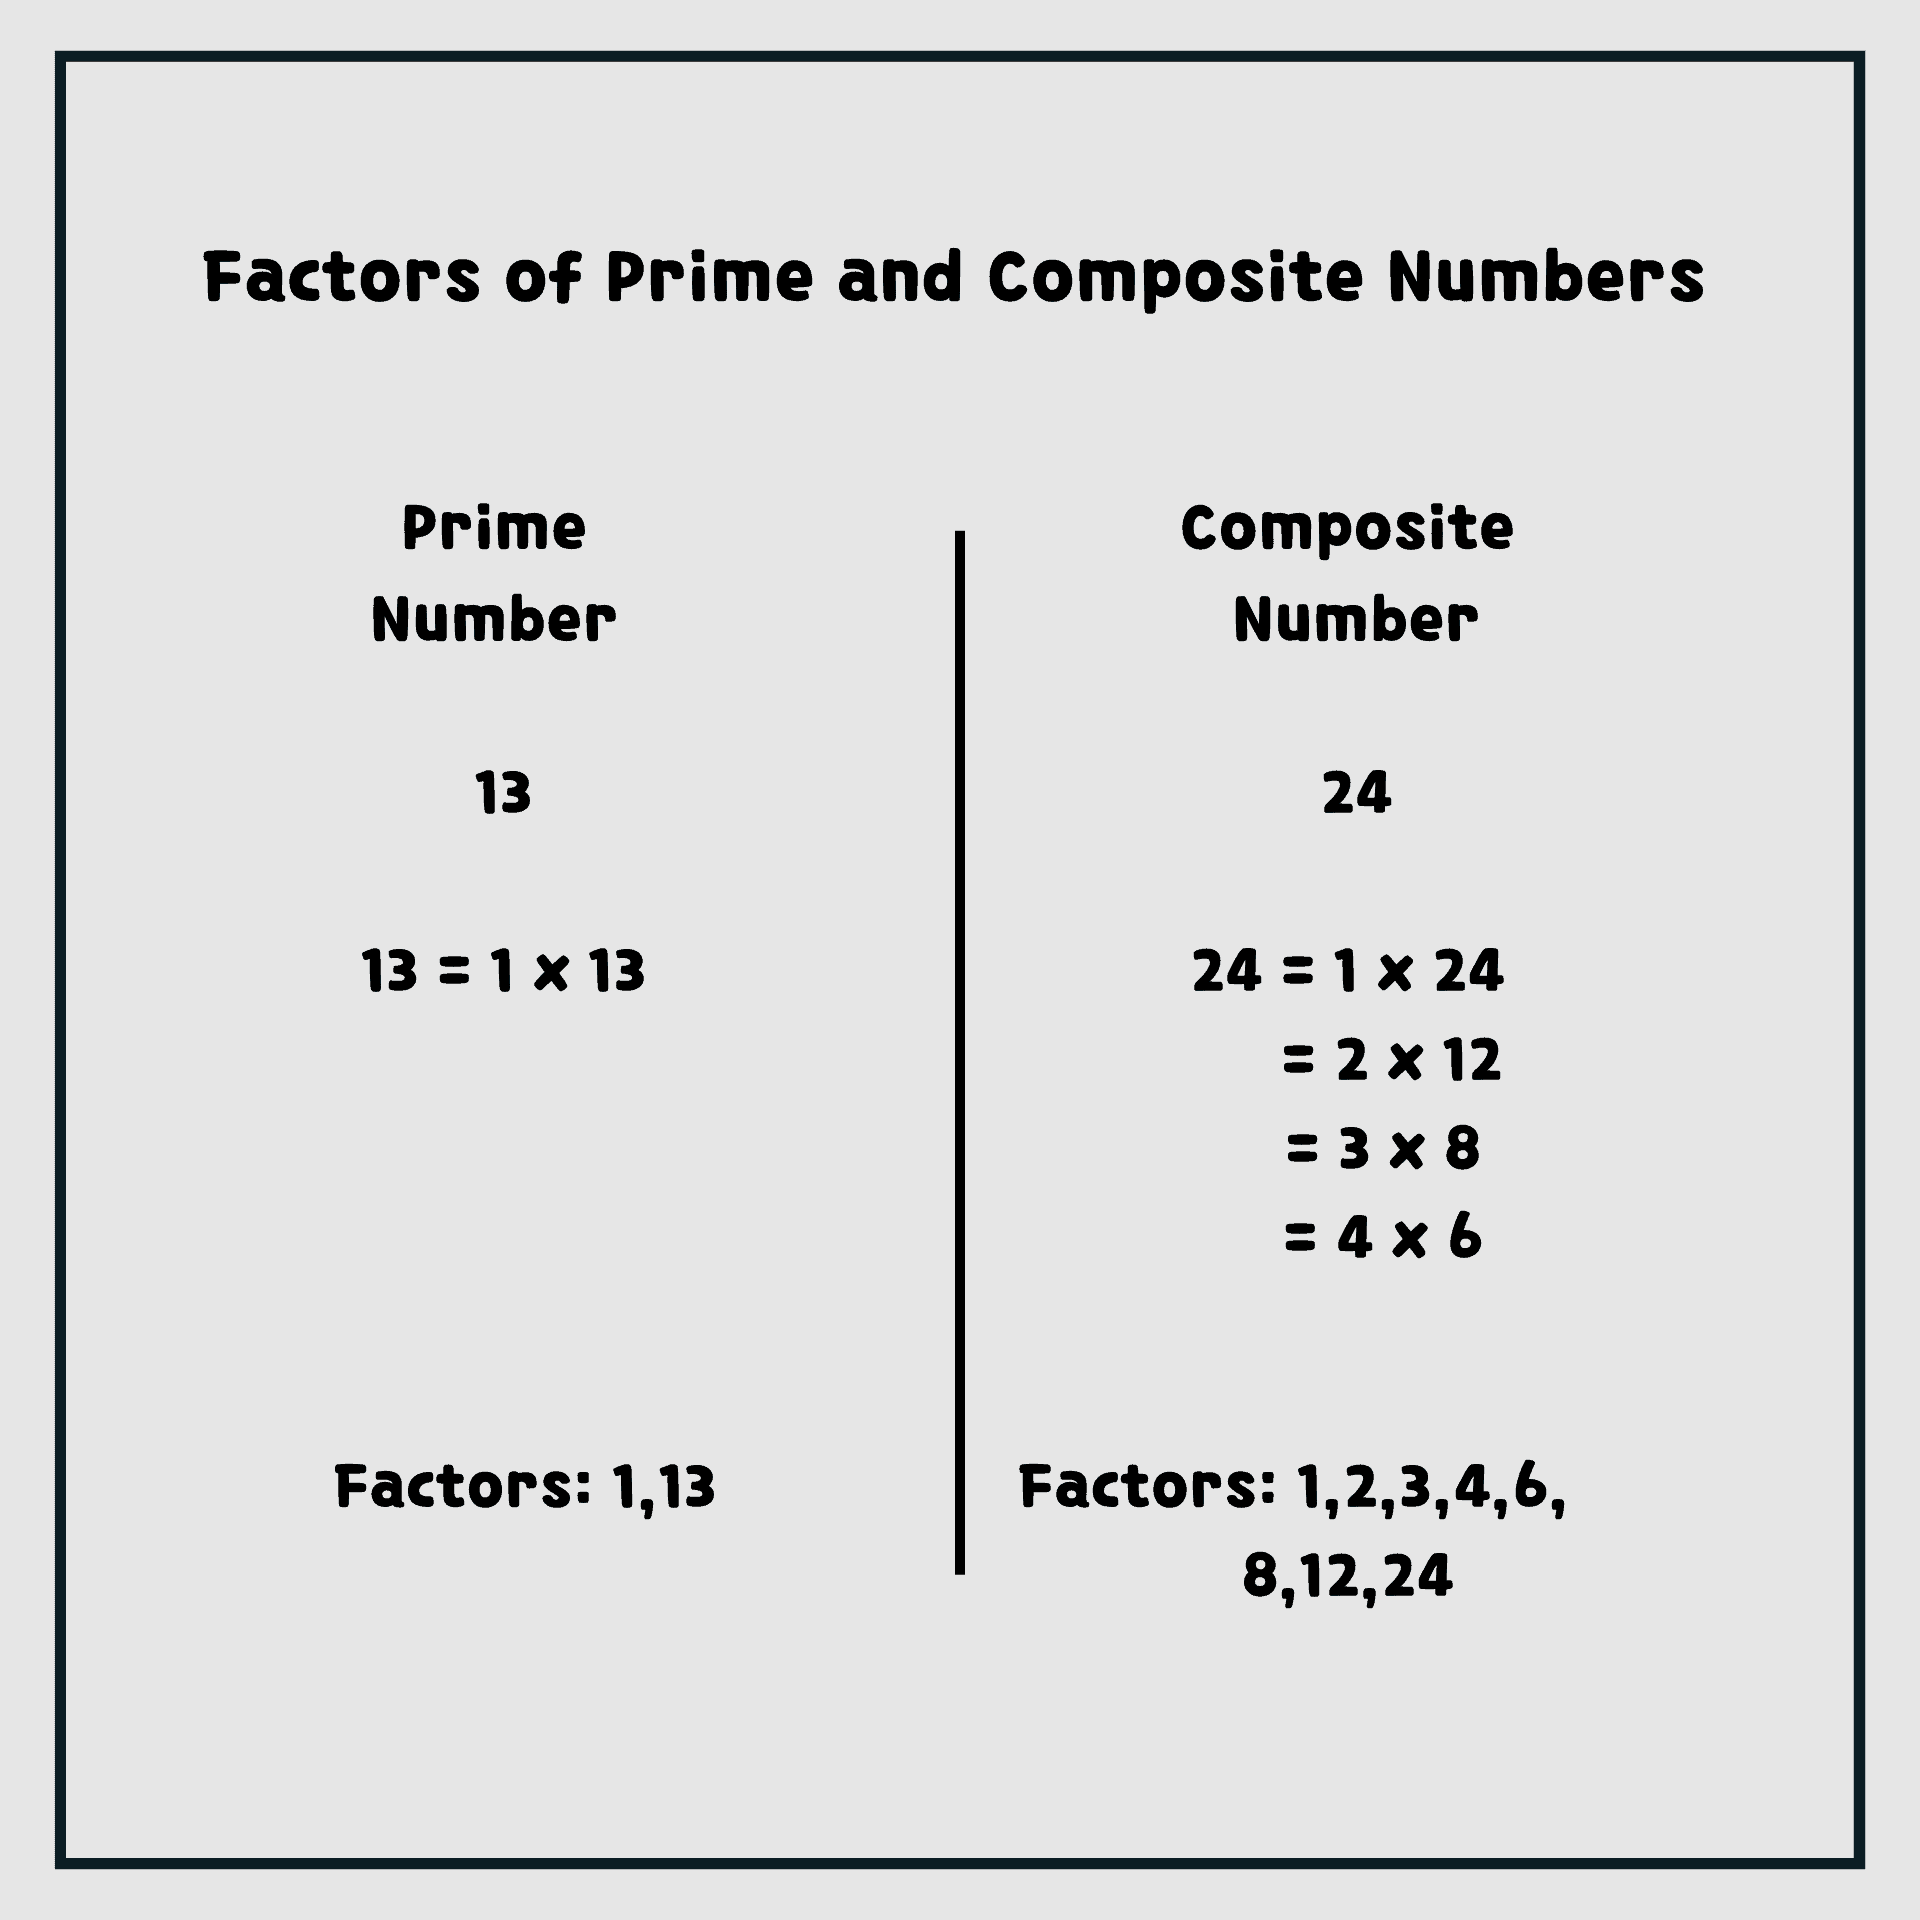 Difference between prime number and composite number in missing factor game